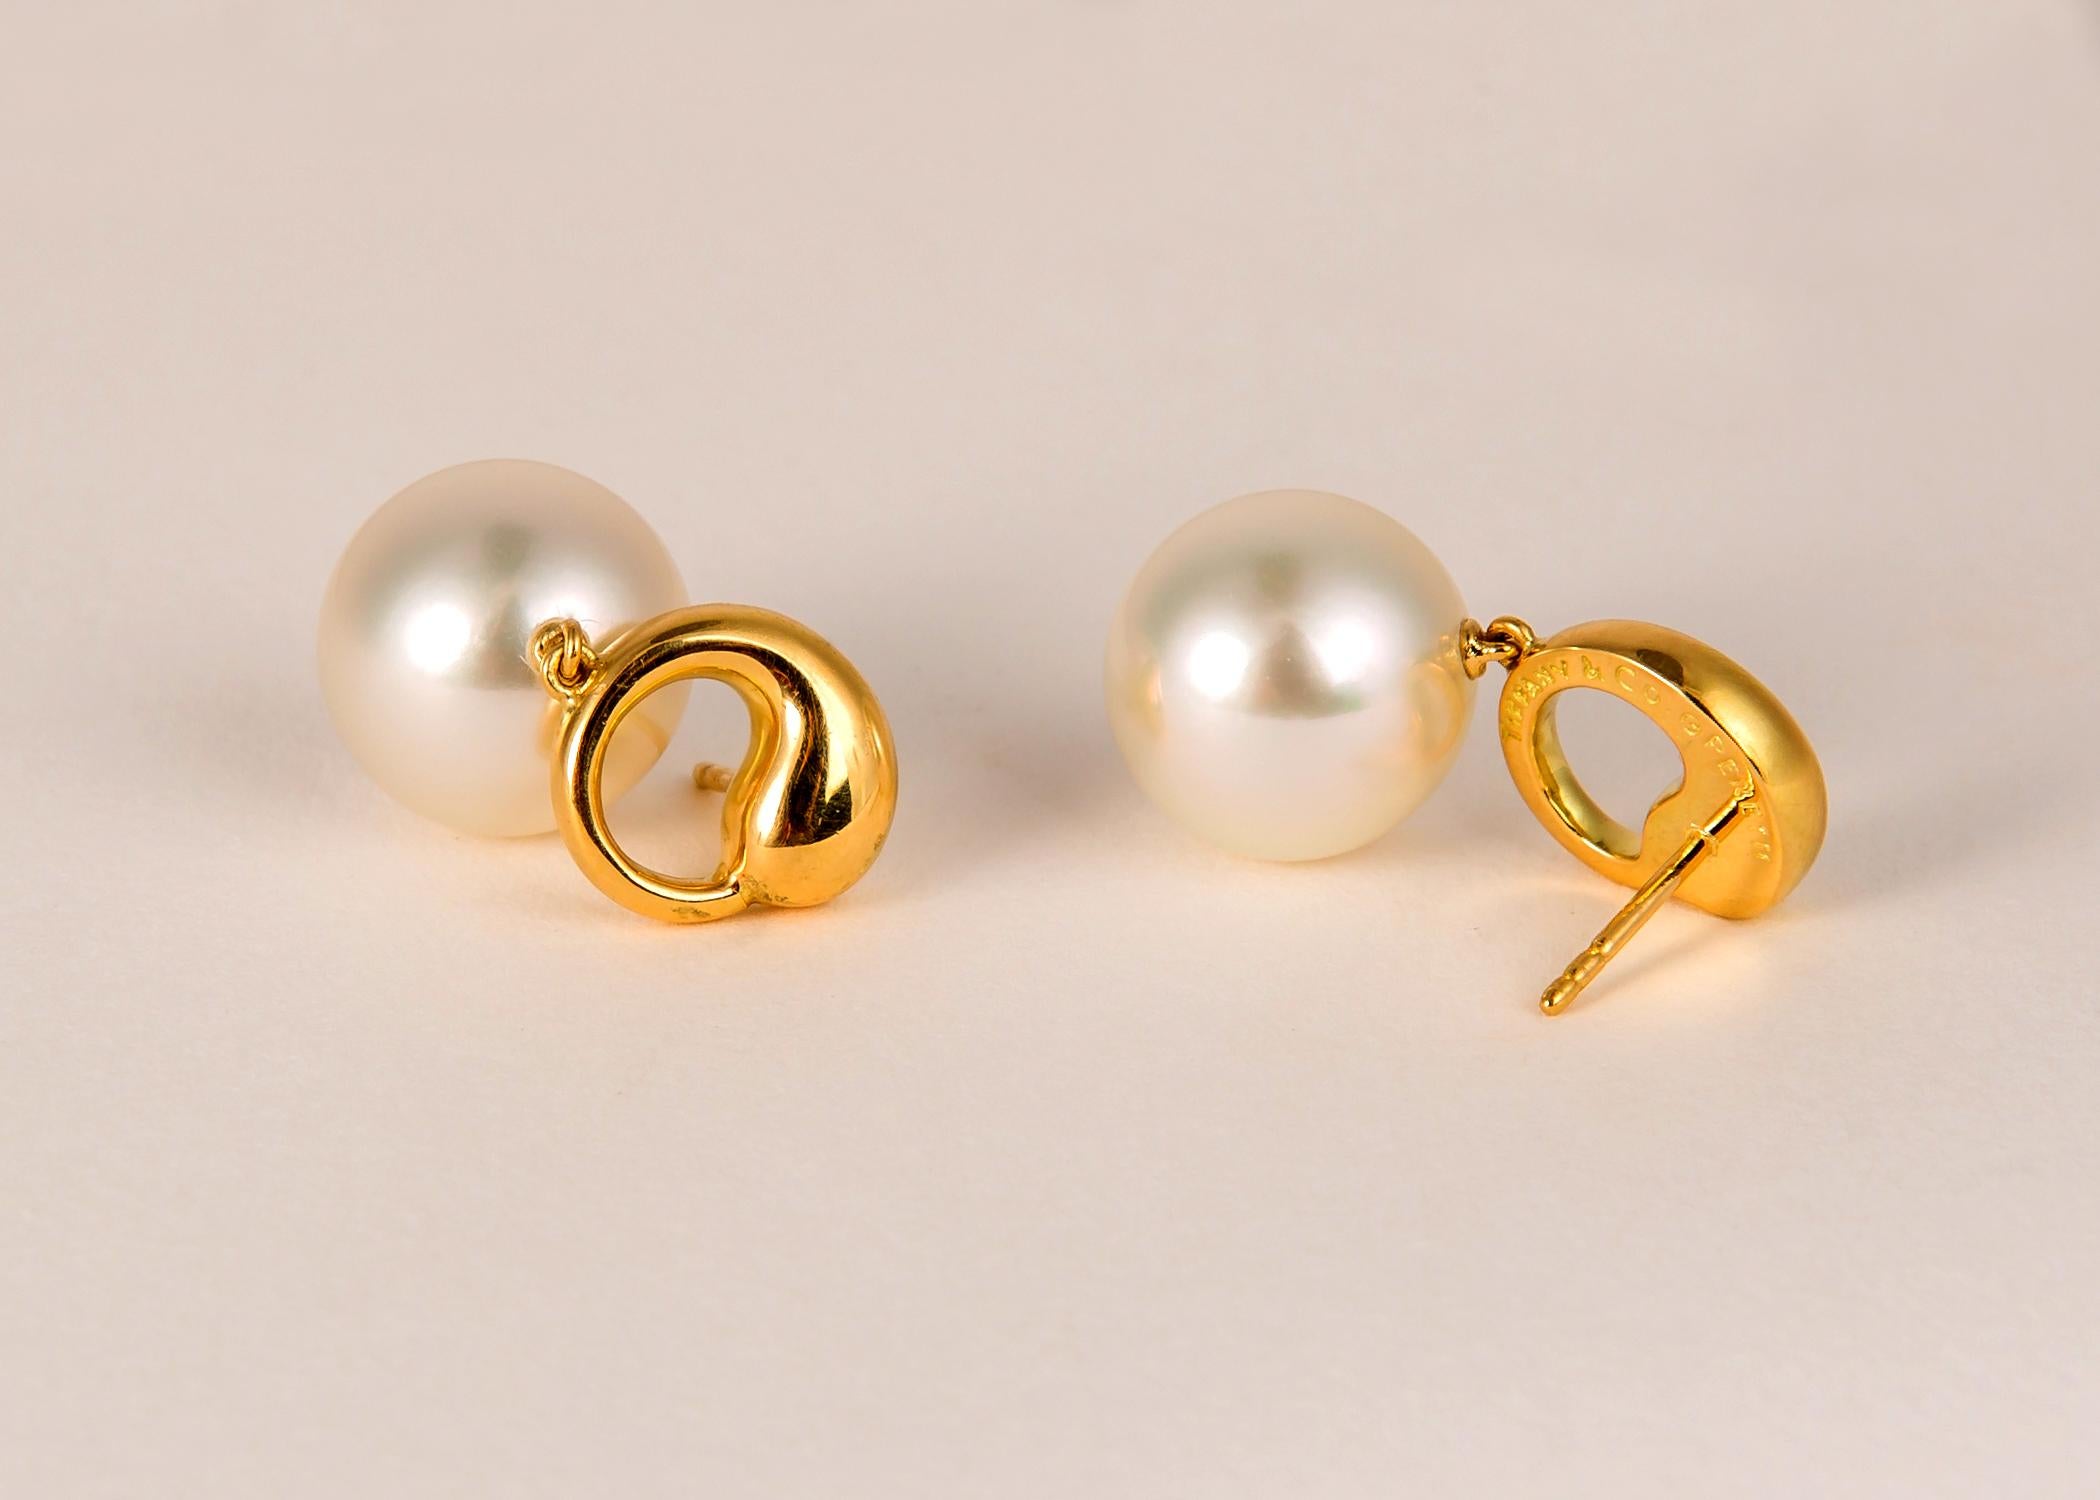 Contemporary Elsa Peretti for Tiffany & Co. Pearl and Gold Earrings